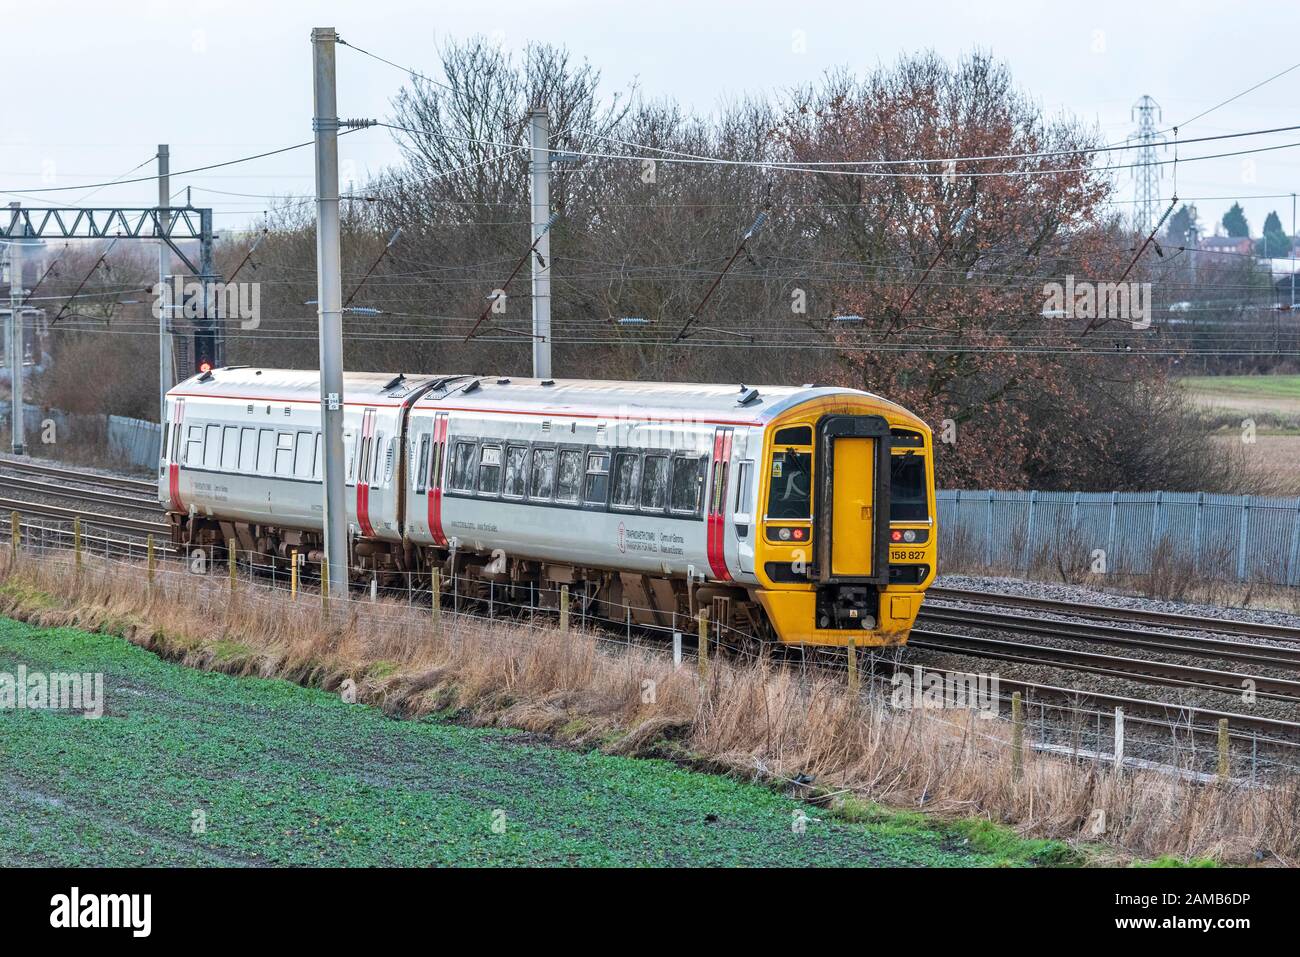 Class 158 Express Sprinter diesel multiple-unit train. Trains for Wales livery. Stock Photo